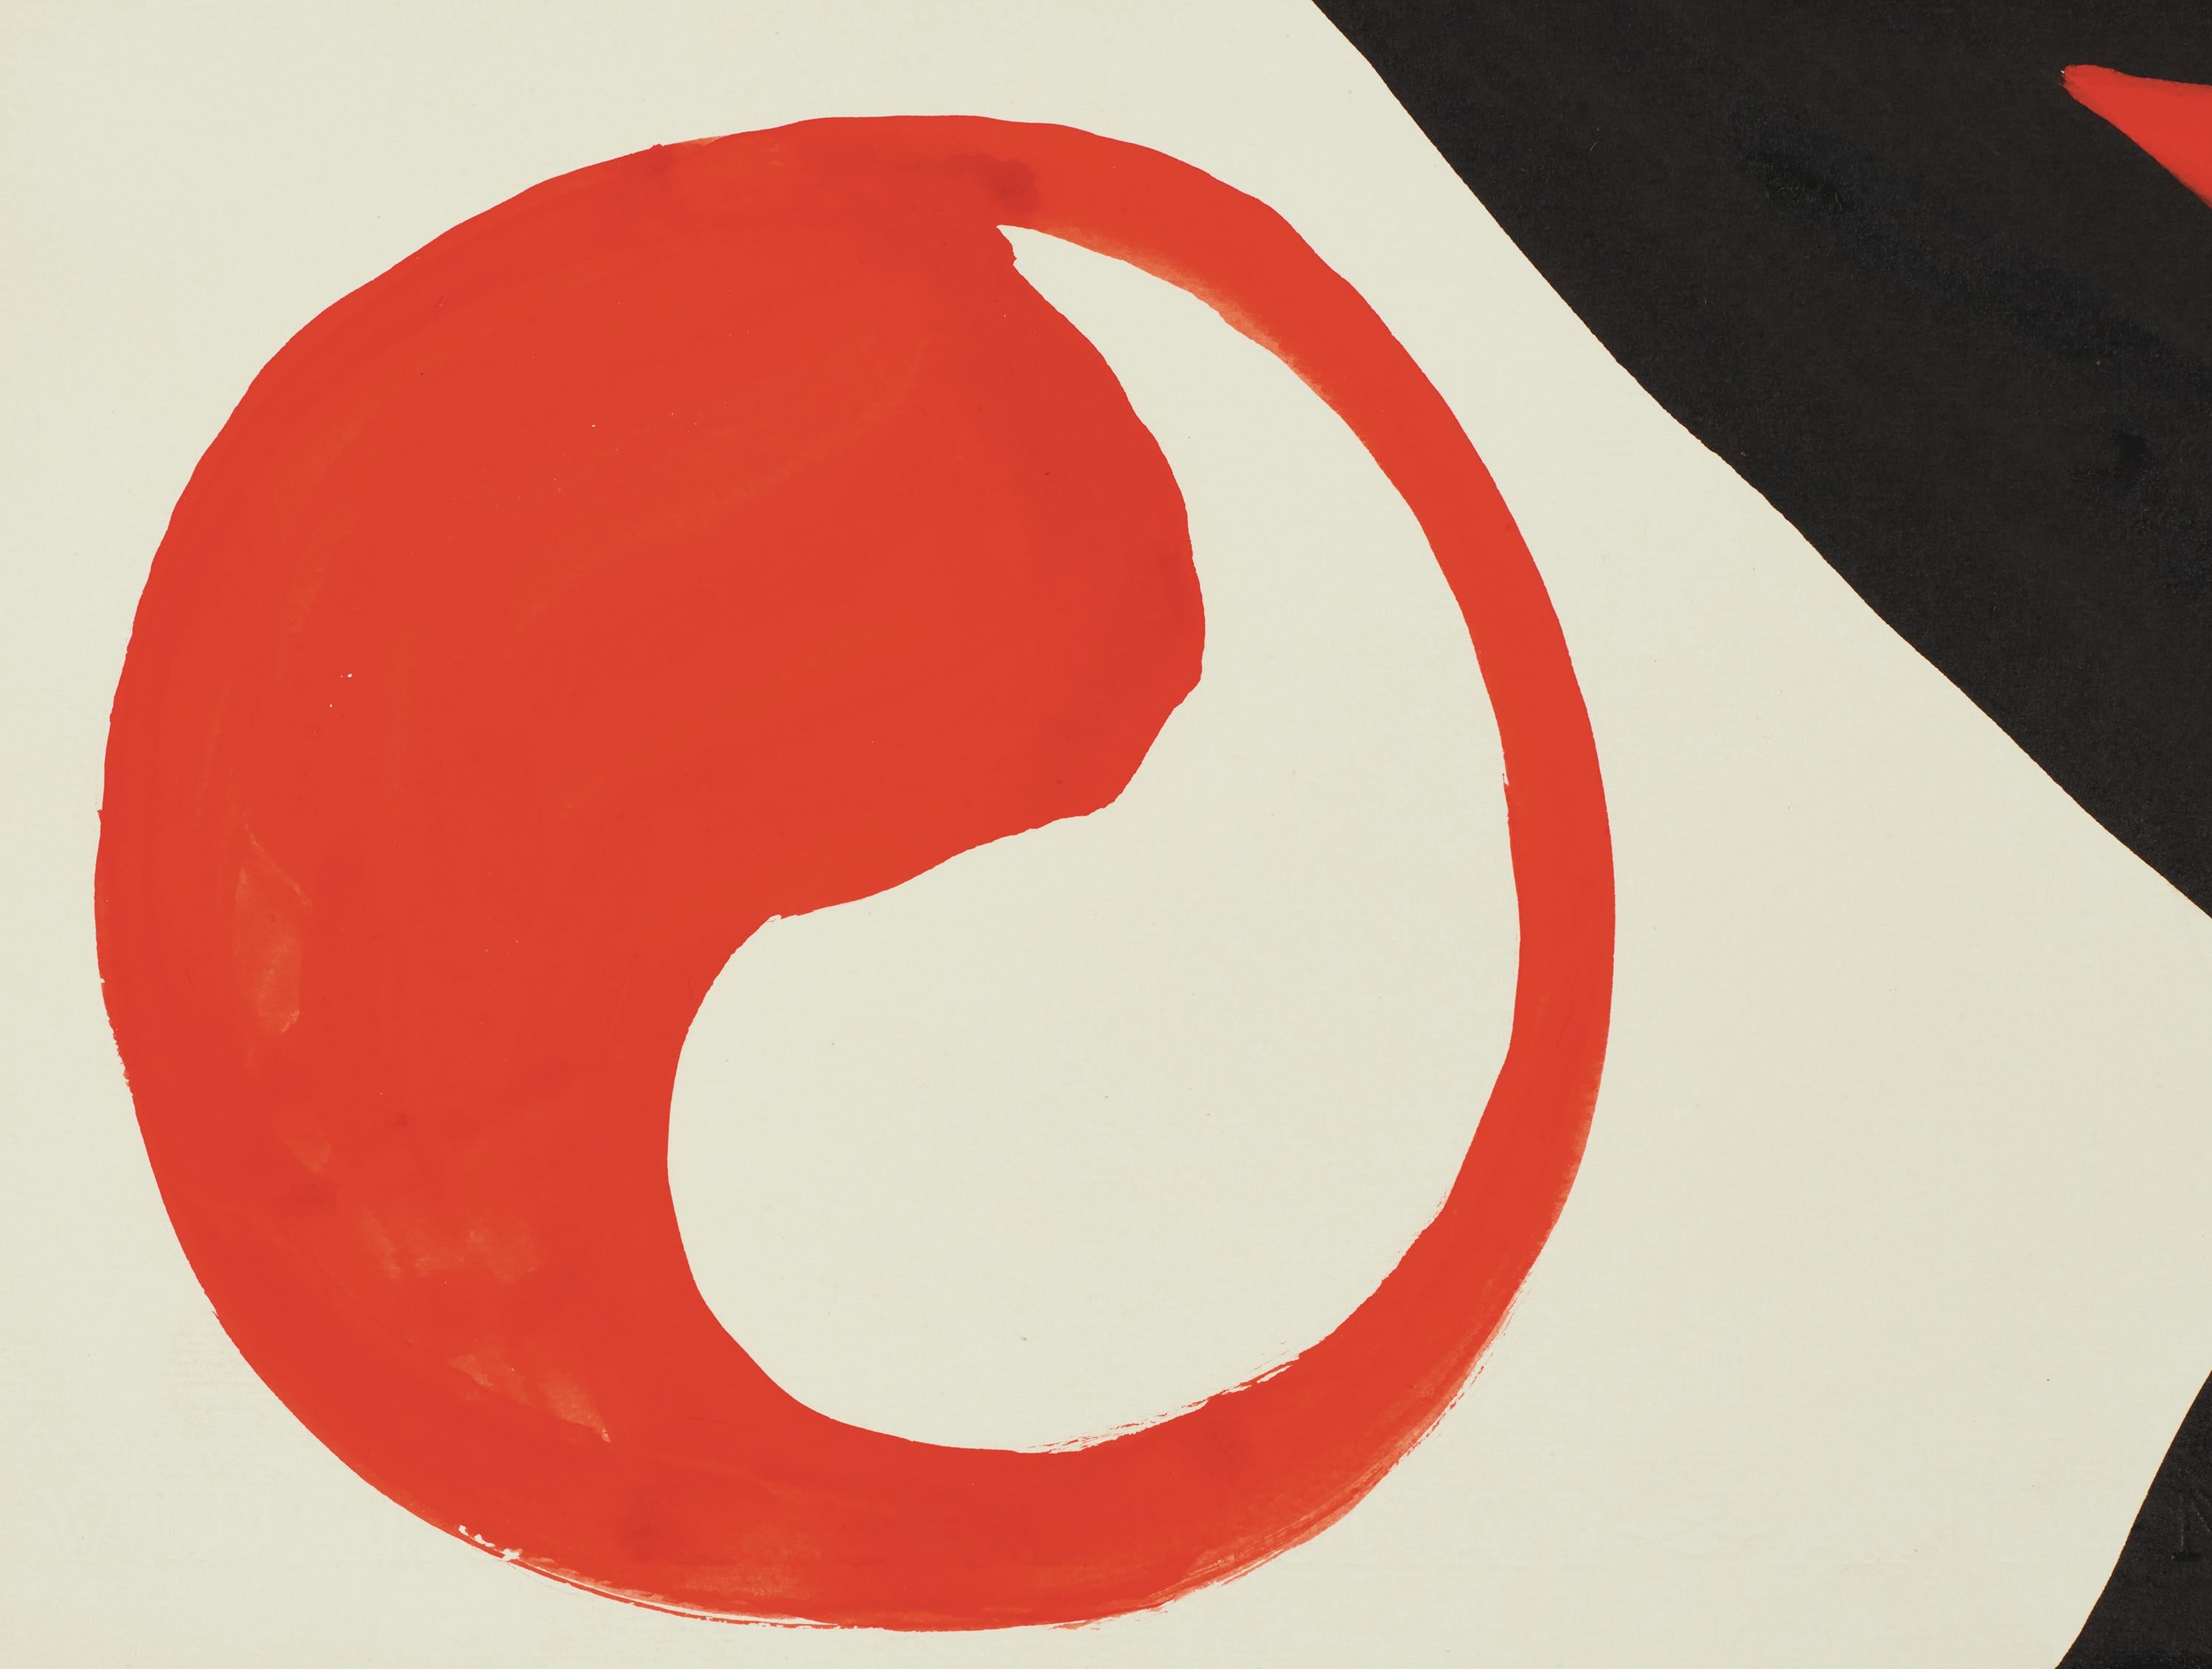 how did alexander calder use the elements of art and principles of design in his sculptures